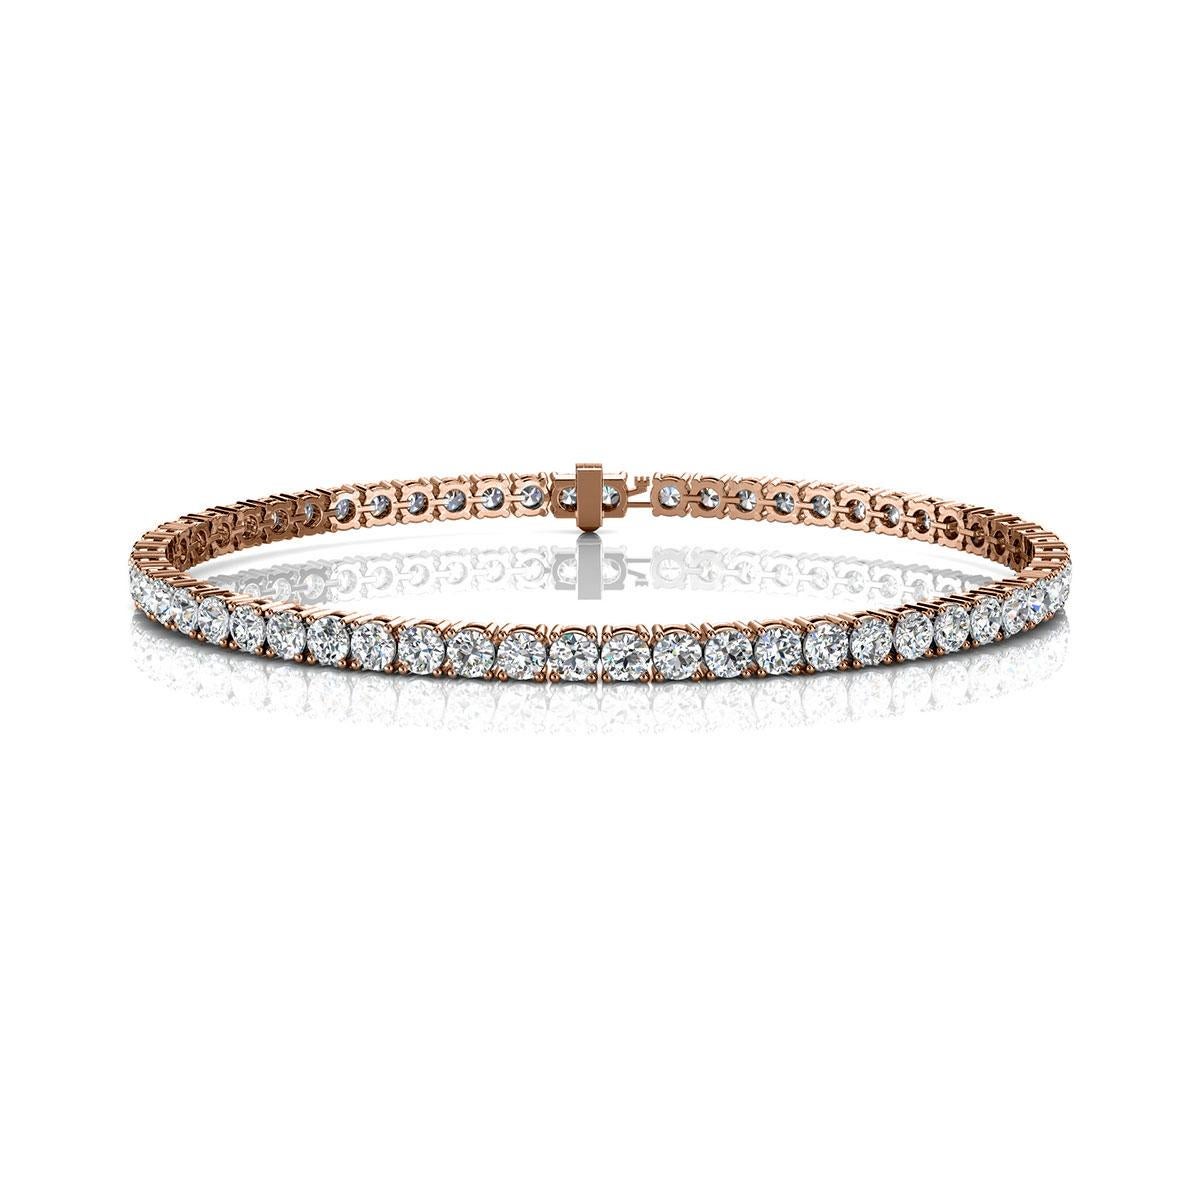 A timeless four prongs diamonds tennis bracelet. Experience the Difference!

Product details: 

Center Gemstone Type: NATURAL DIAMOND
Center Gemstone Color: WHITE
Center Gemstone Shape: ROUND
Center Diamond Carat Weight: 5
Metal: 14K Rose Gold
Metal